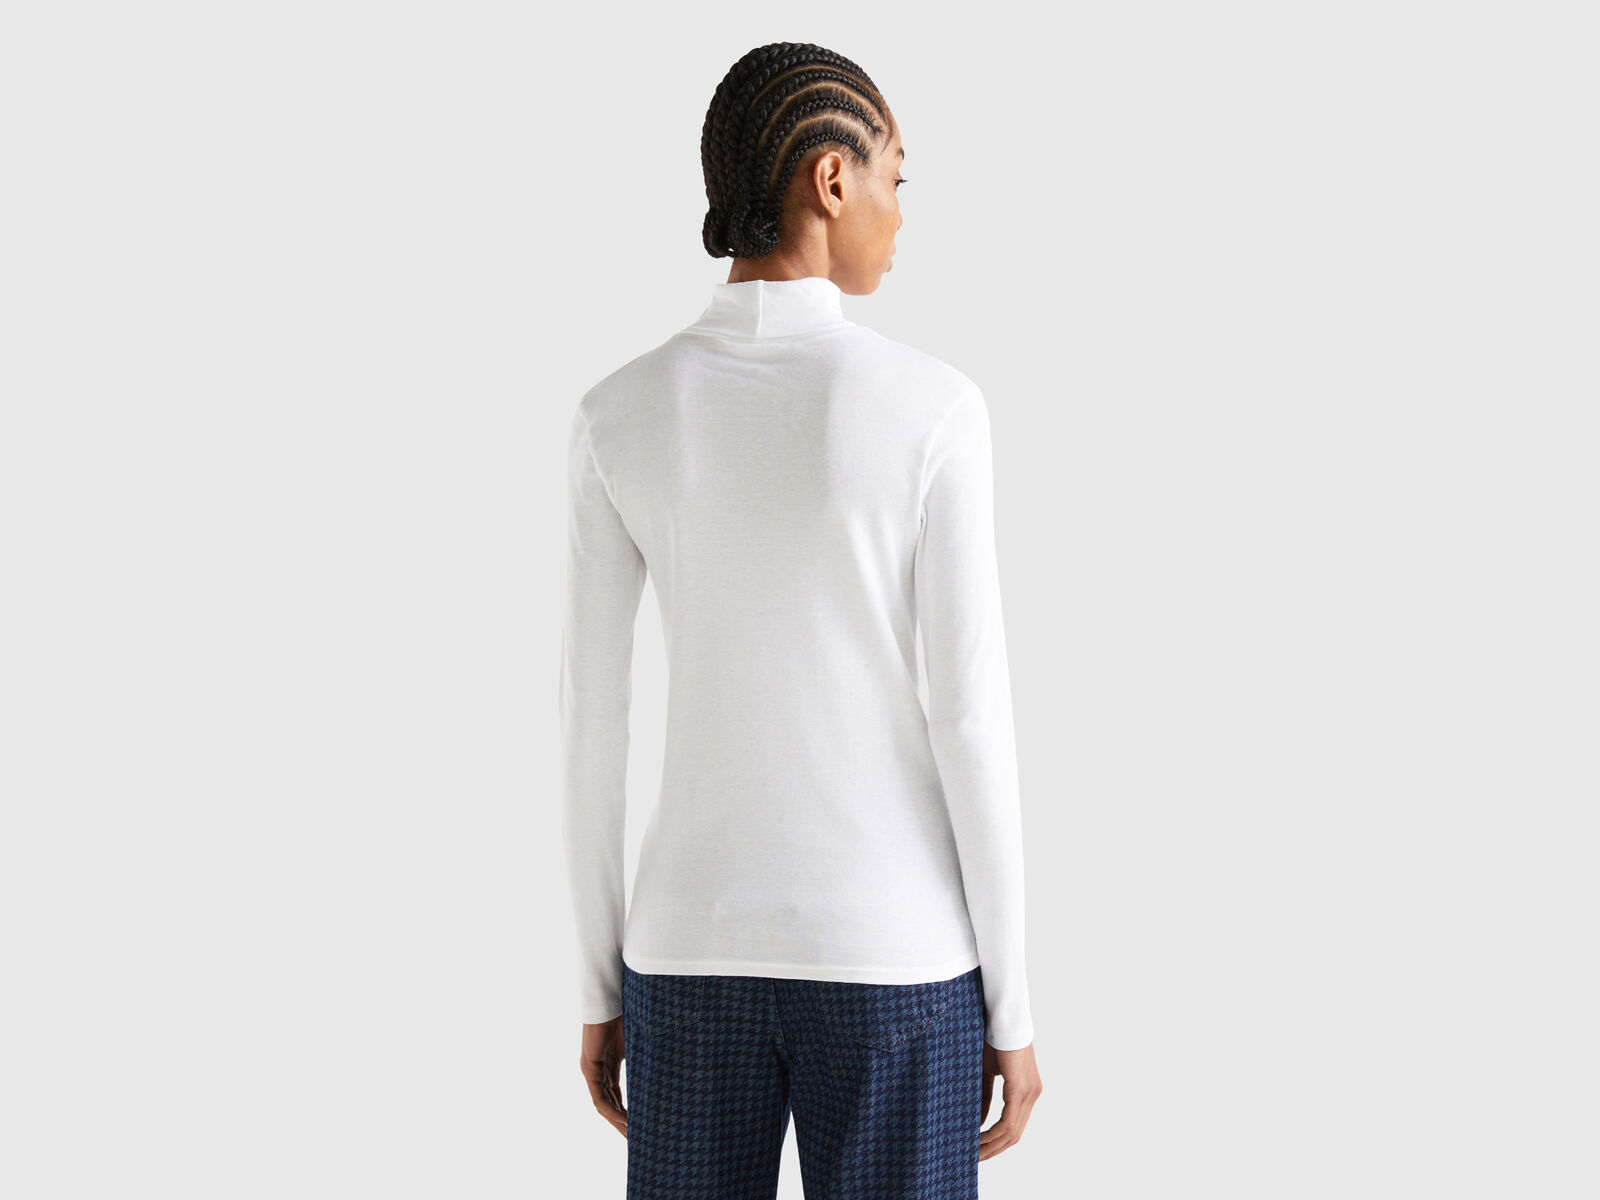 Long sleeve t-shirt with high White | Benetton neck 